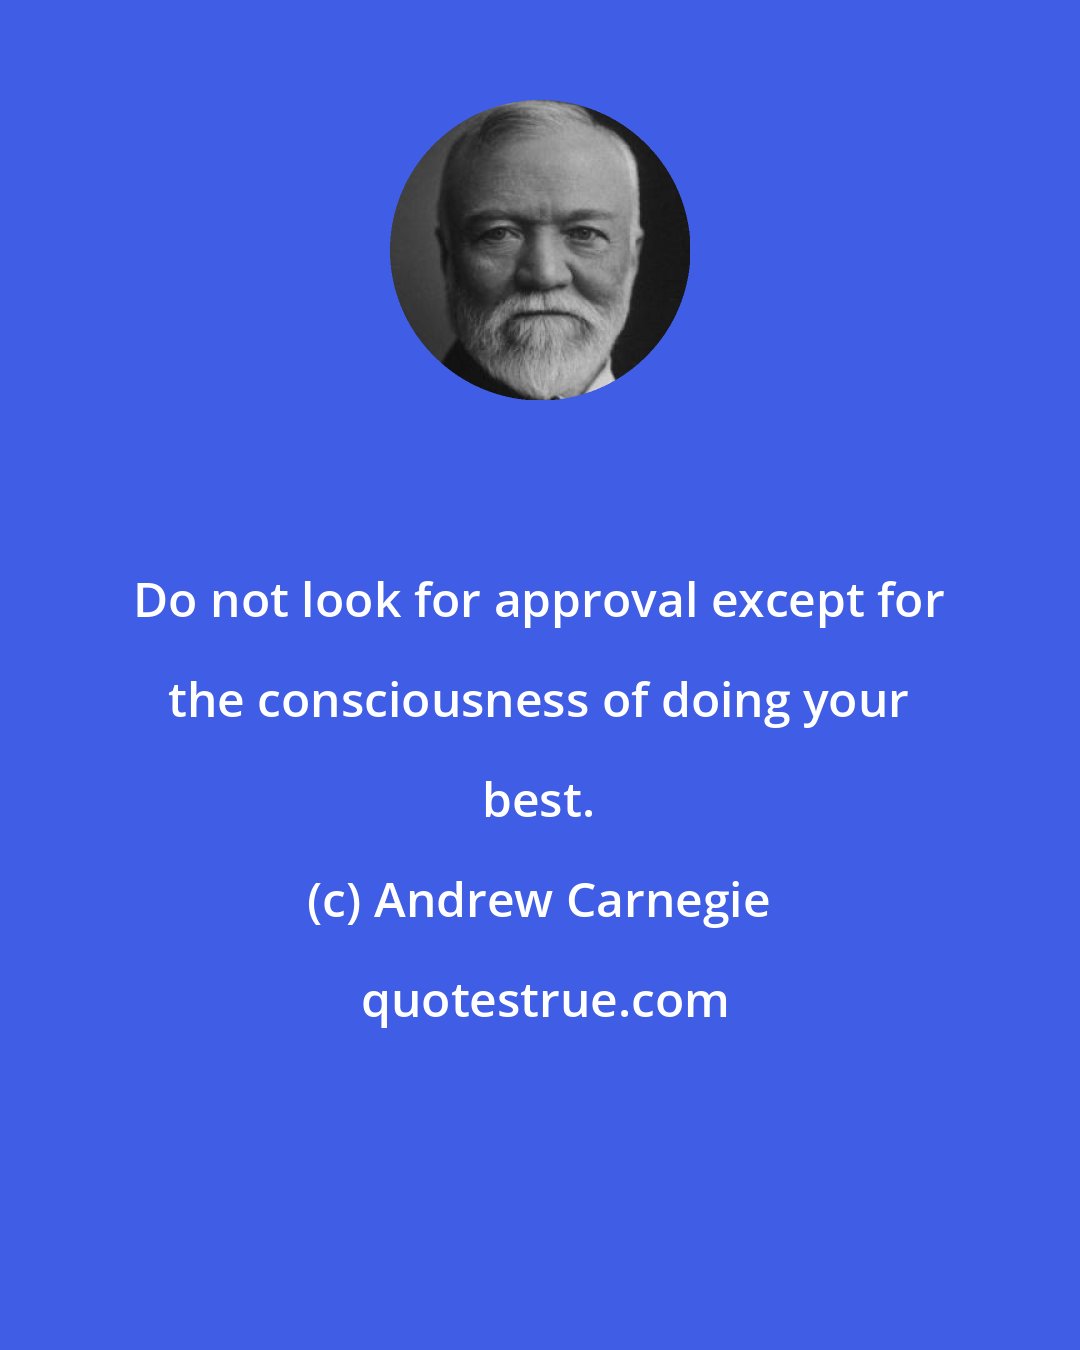 Andrew Carnegie: Do not look for approval except for the consciousness of doing your best.